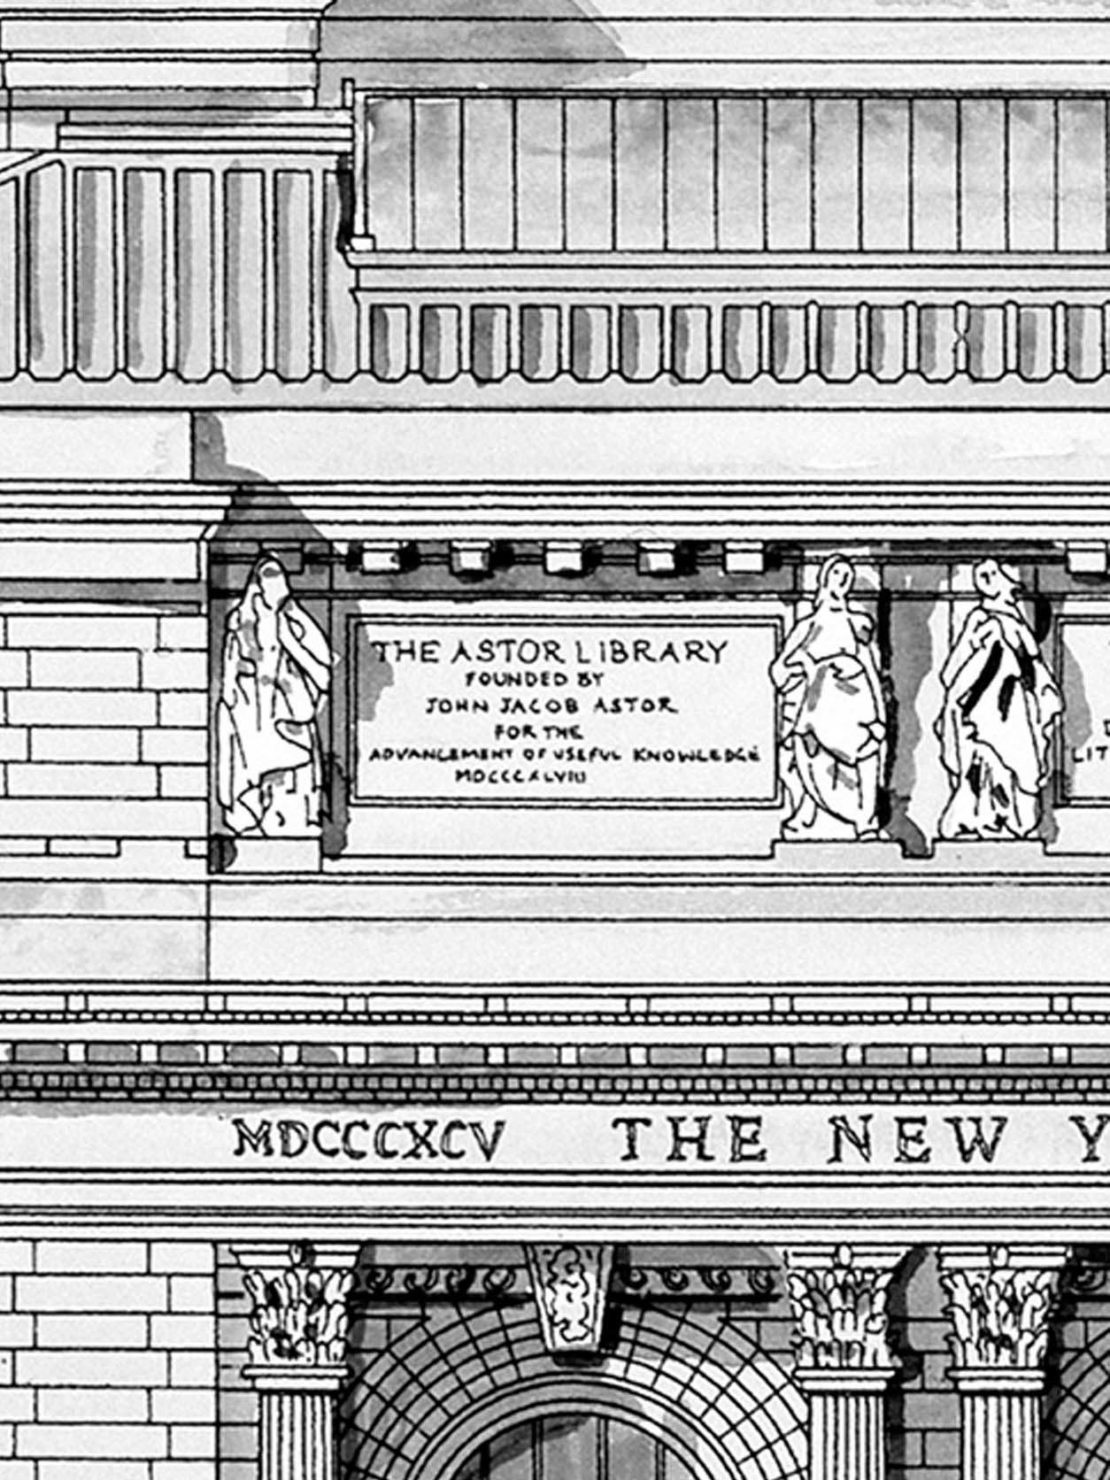 Drawing of the New York Public Library